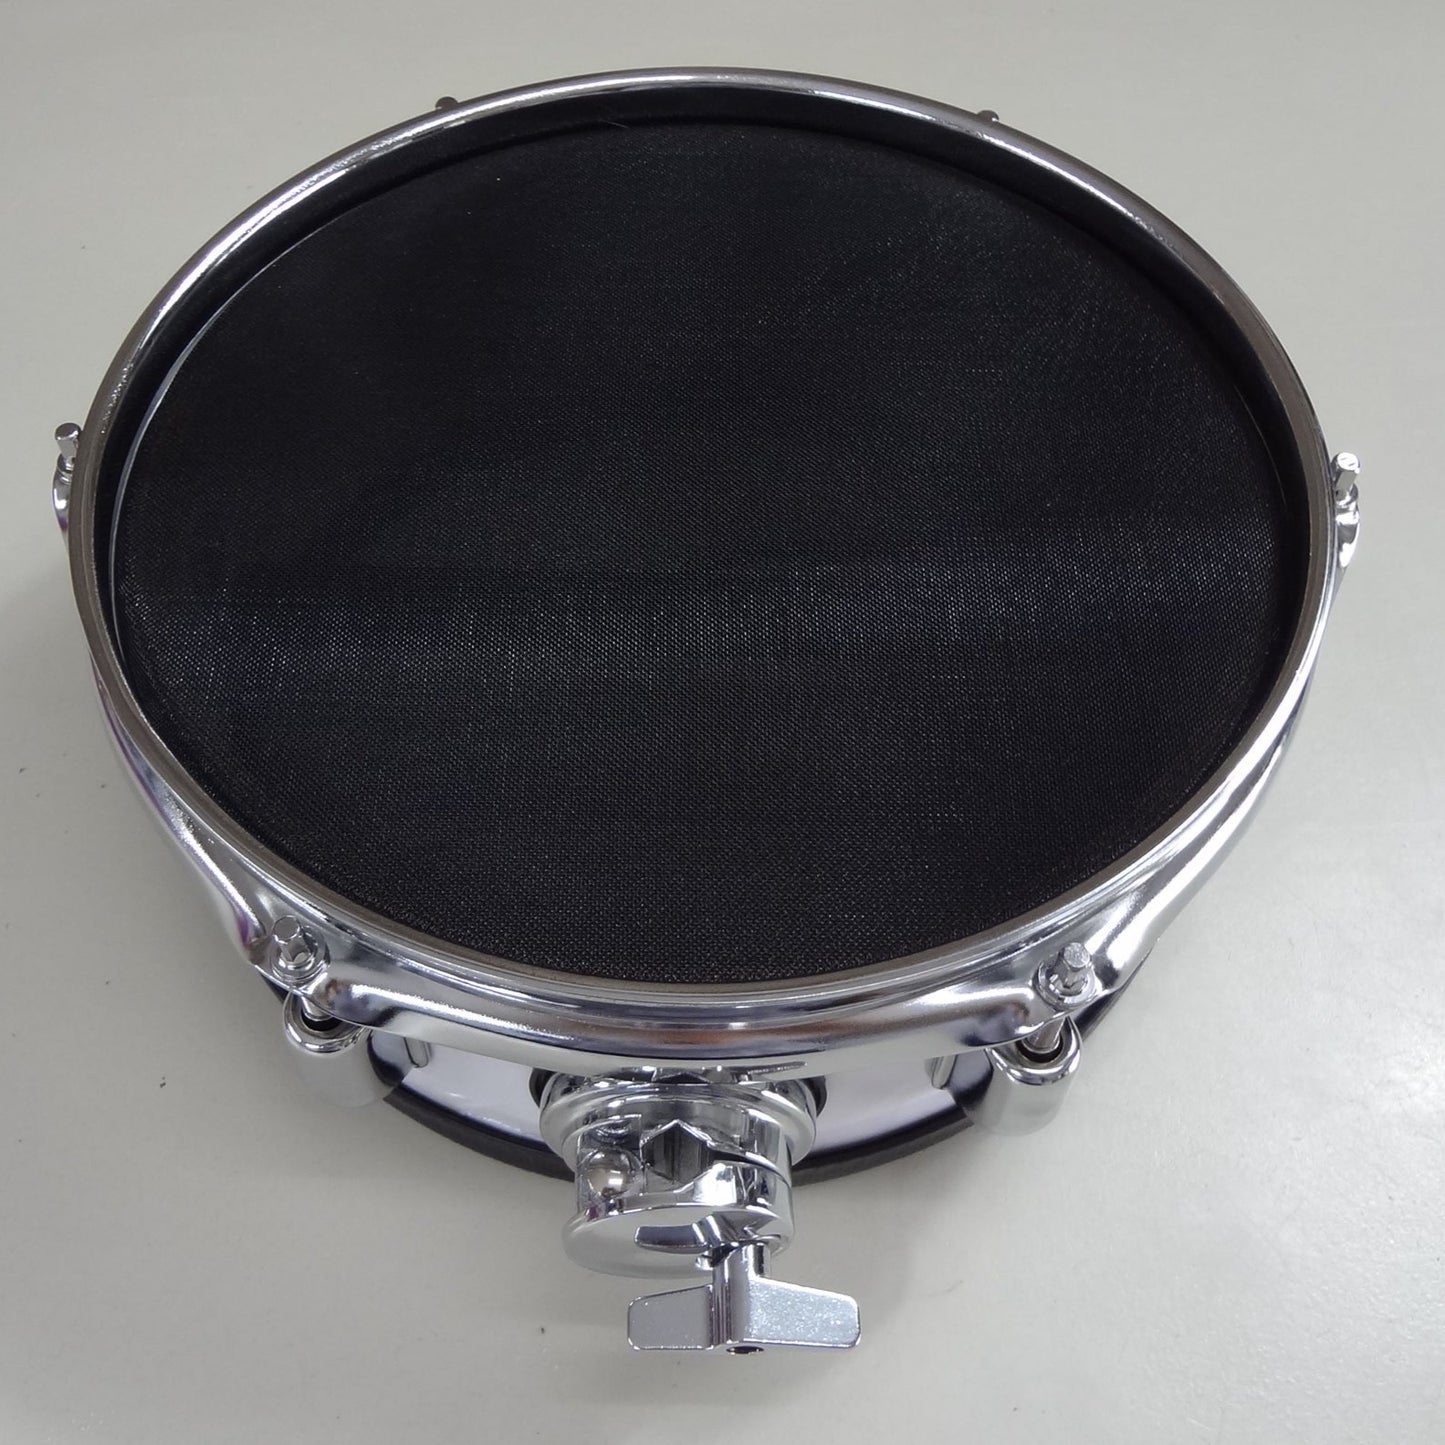 New 10 Inch Custom Electronic Snare Drum - White Pearl - Tin Chrome Lugs.